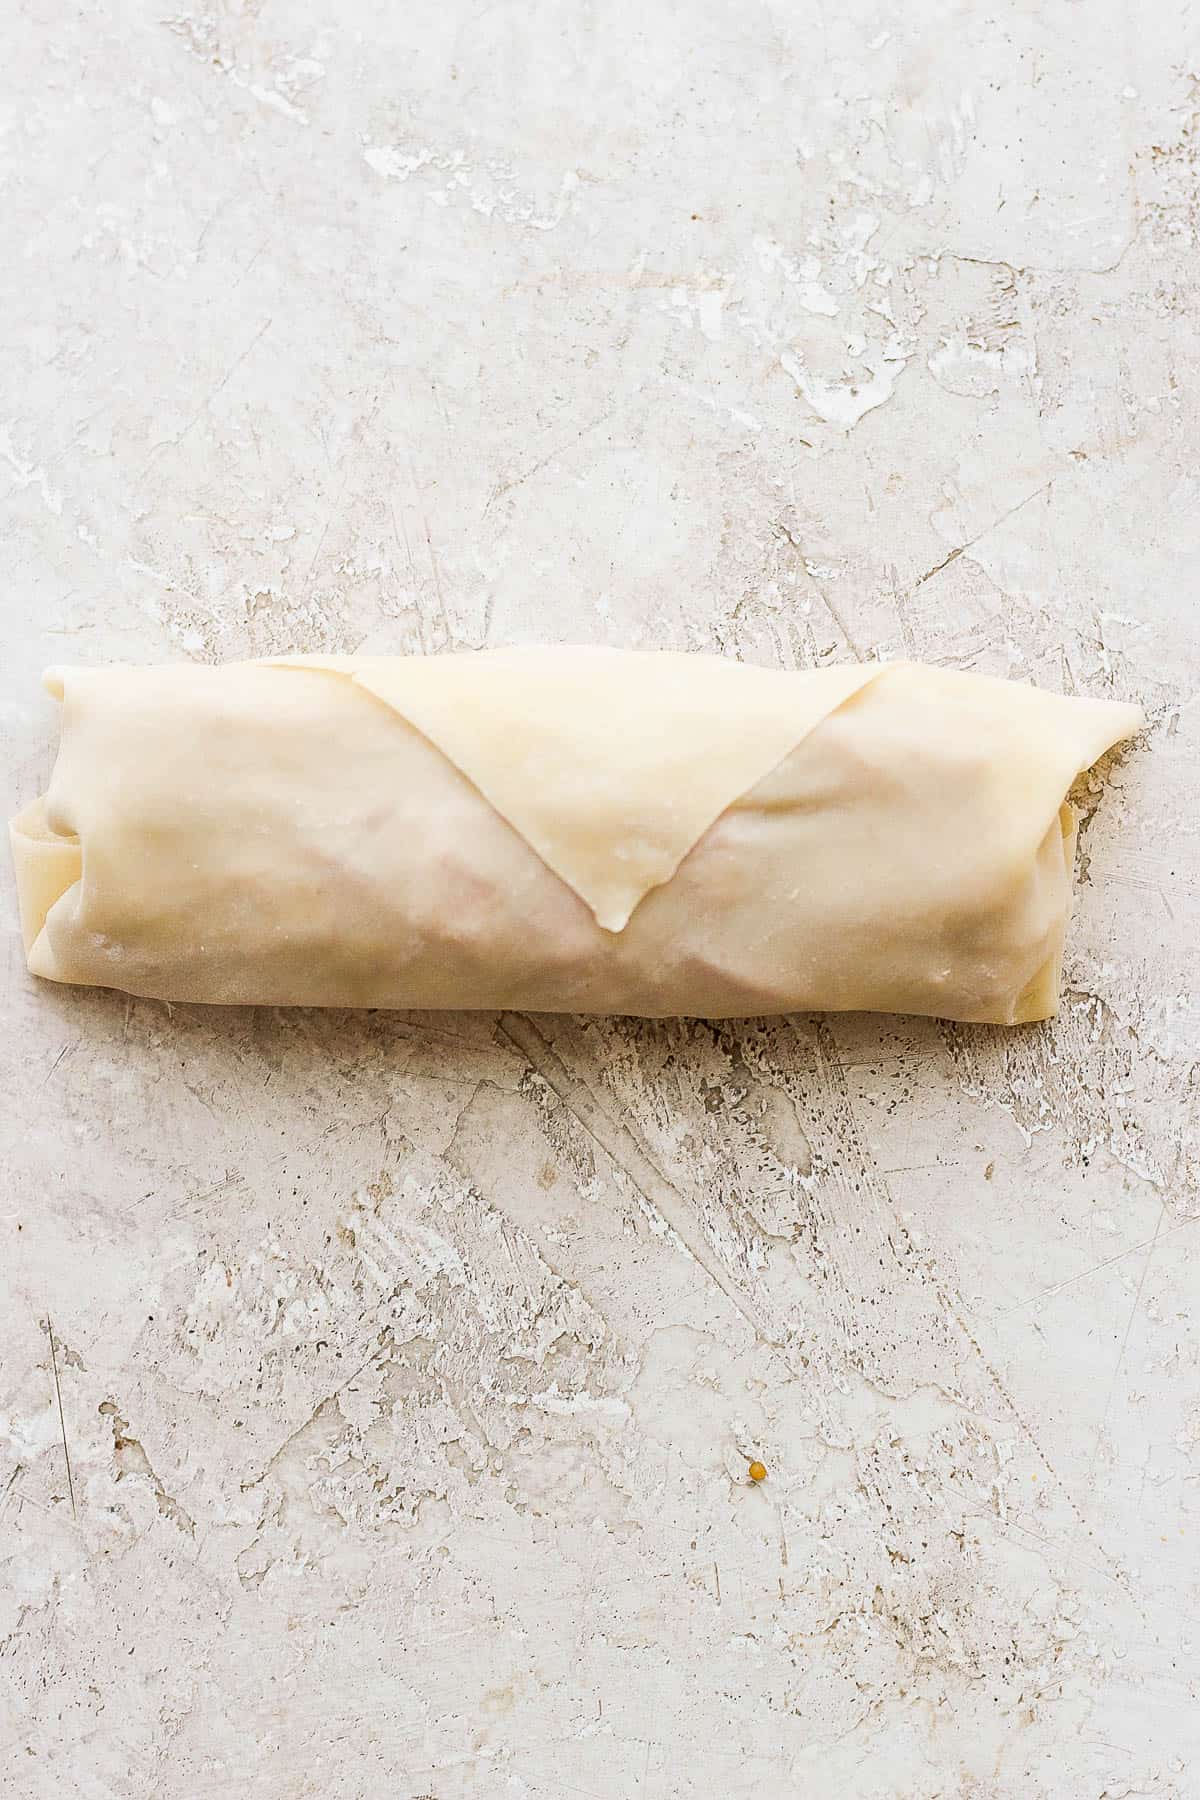 A fully wrapped egg roll.